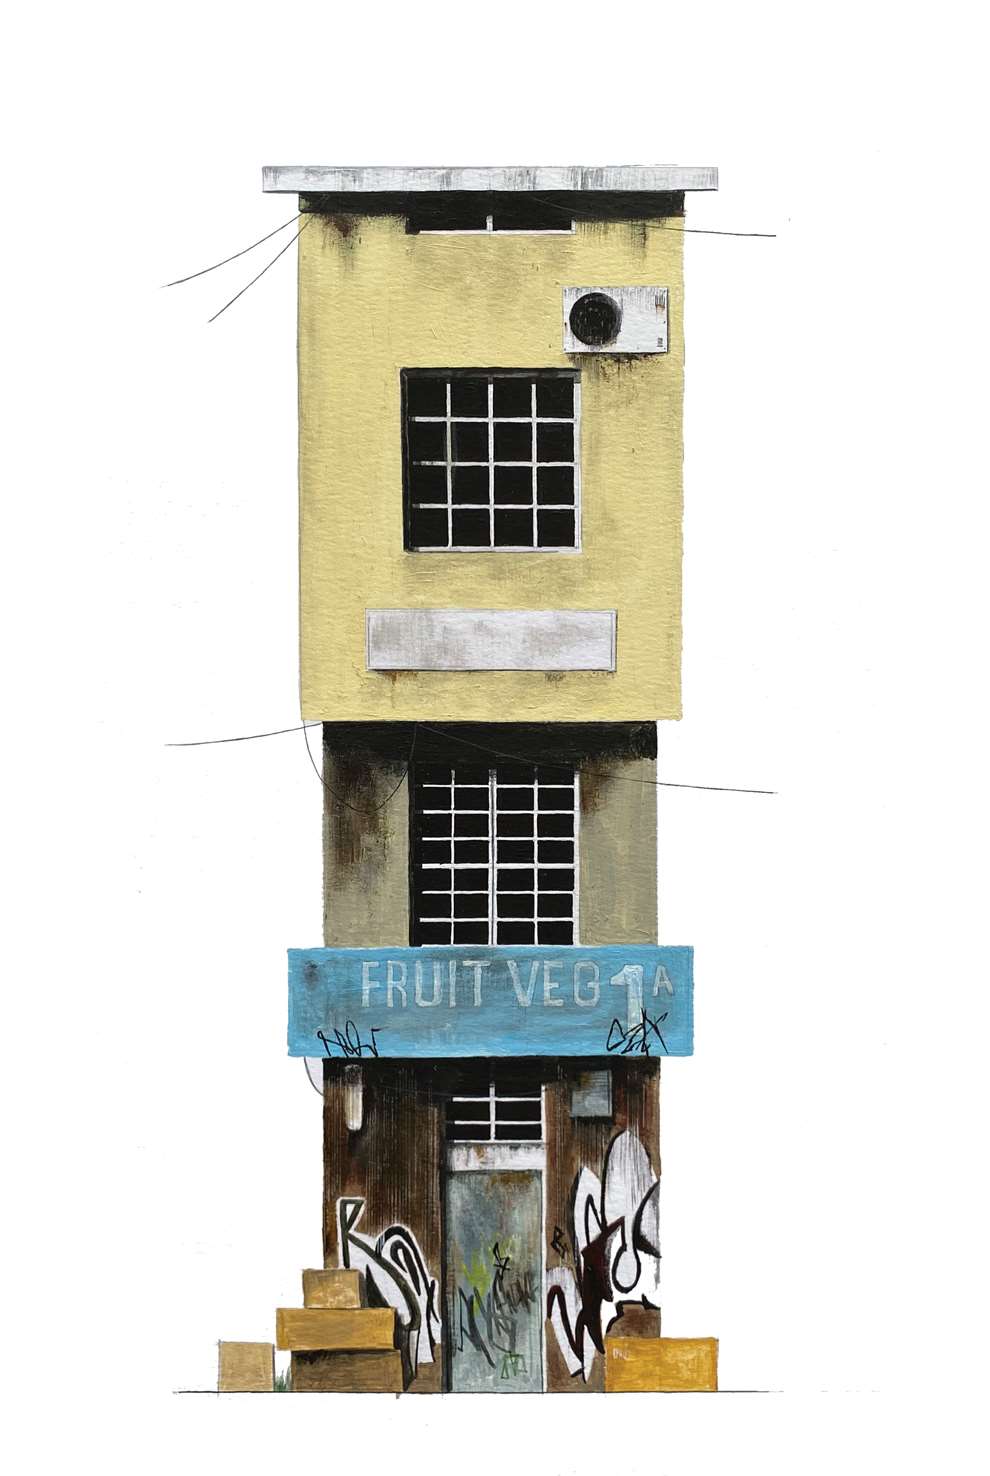 Nick Coupland, Mixed Media illustration of bleak architecture Pen and ink combined with collage and paint to create a striking bold image. 